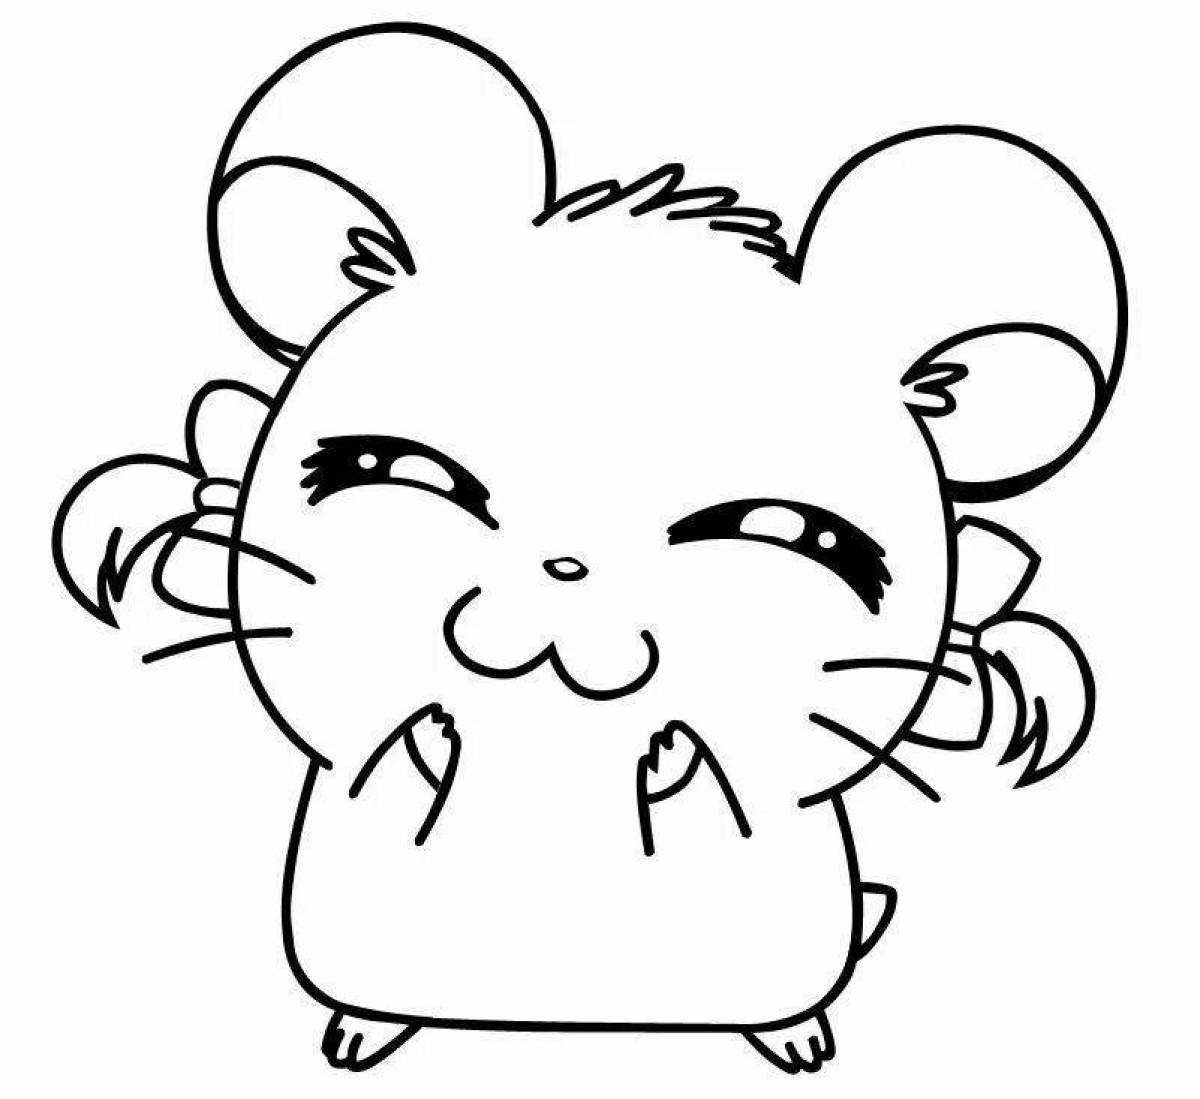 Tiny hamster coloring book